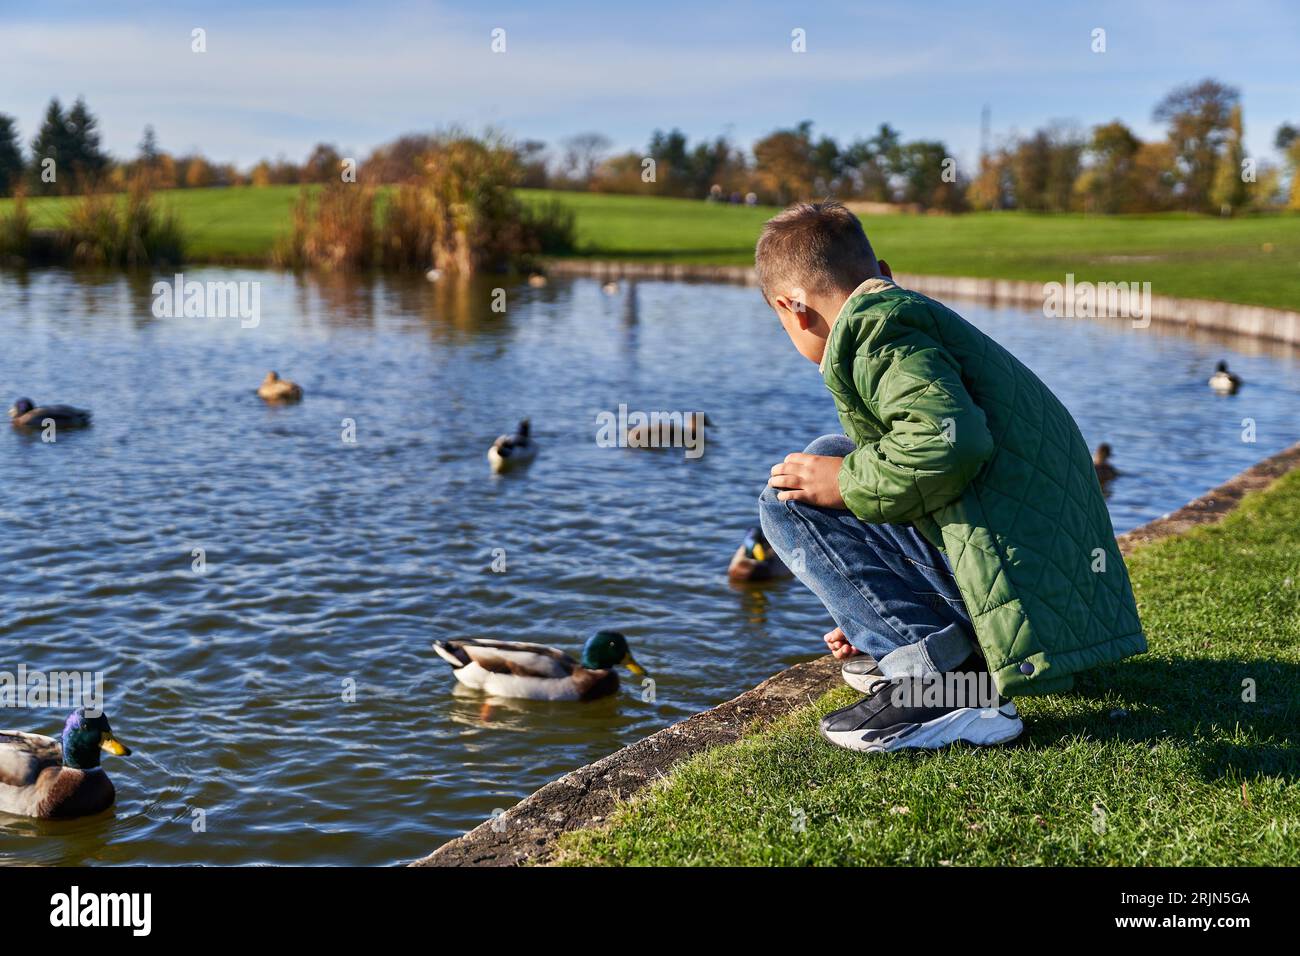 back view of preteen boy in outerwear and jeans sitting near pond with ducks, nature and kid Stock Photo